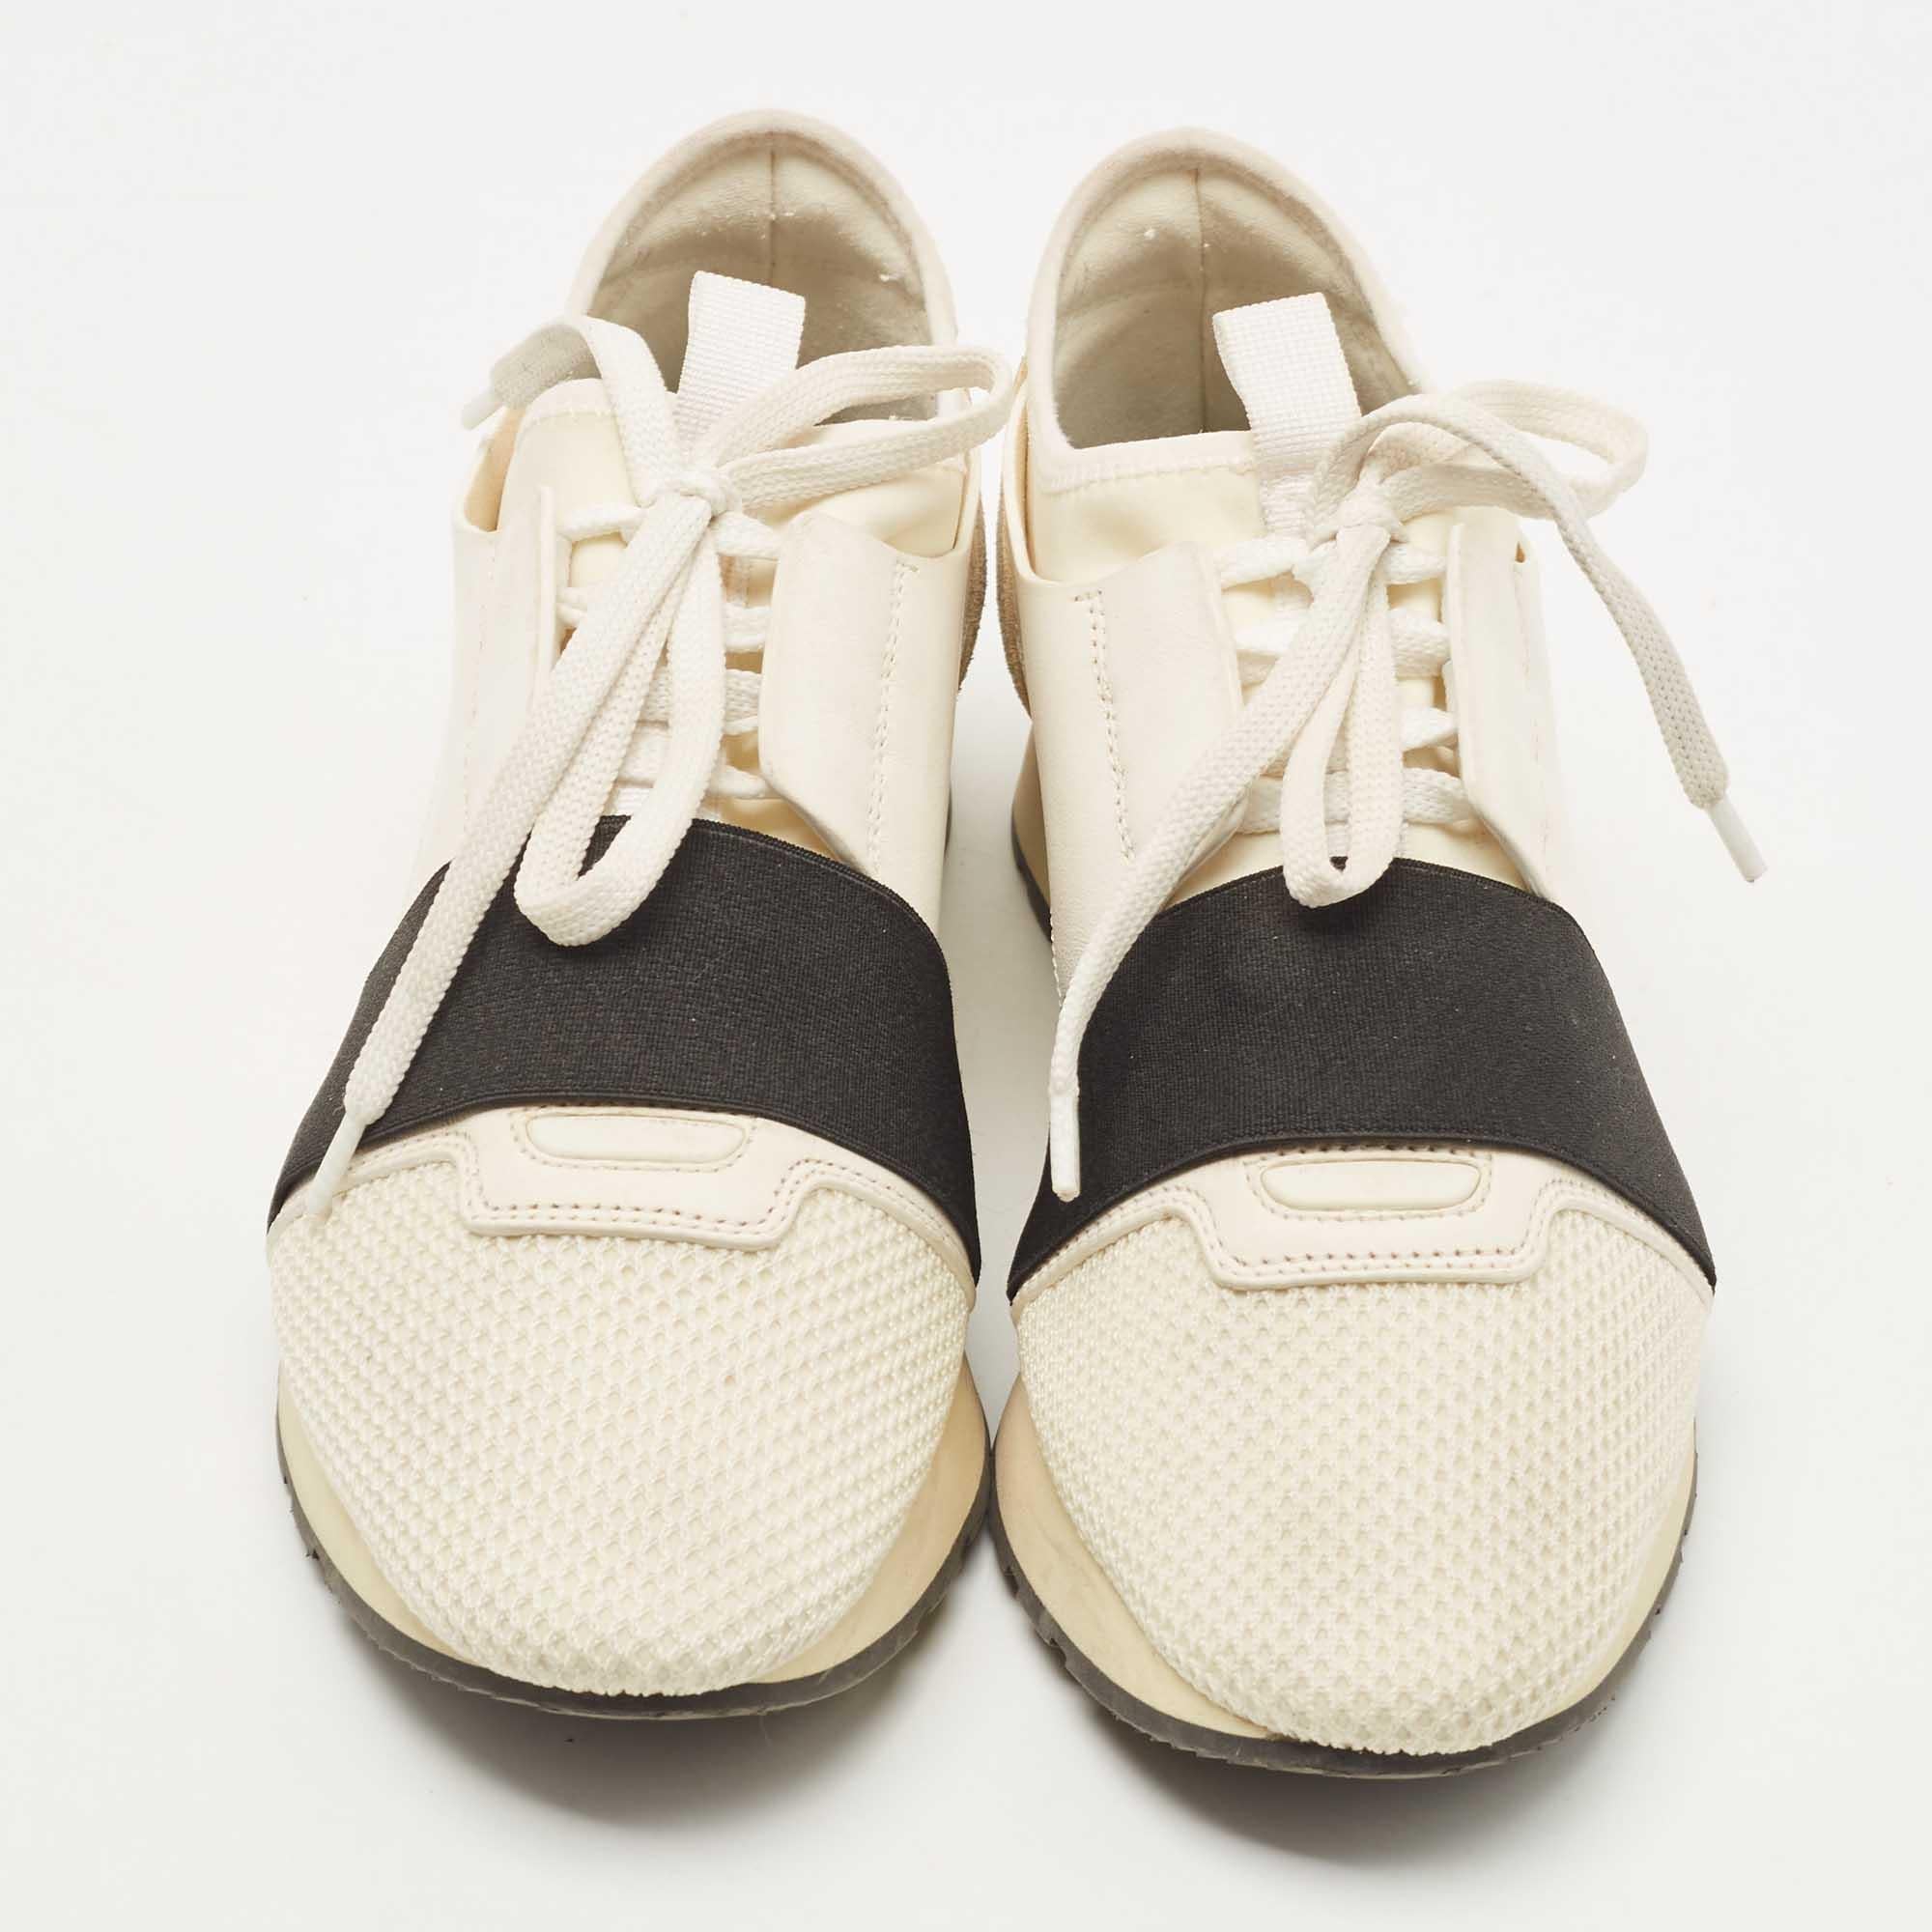 Coming in a classic silhouette, these Balenciaga sneakers are a seamless combination of luxury, comfort, and style. These sneakers are designed with signature details and comfortable insoles.

